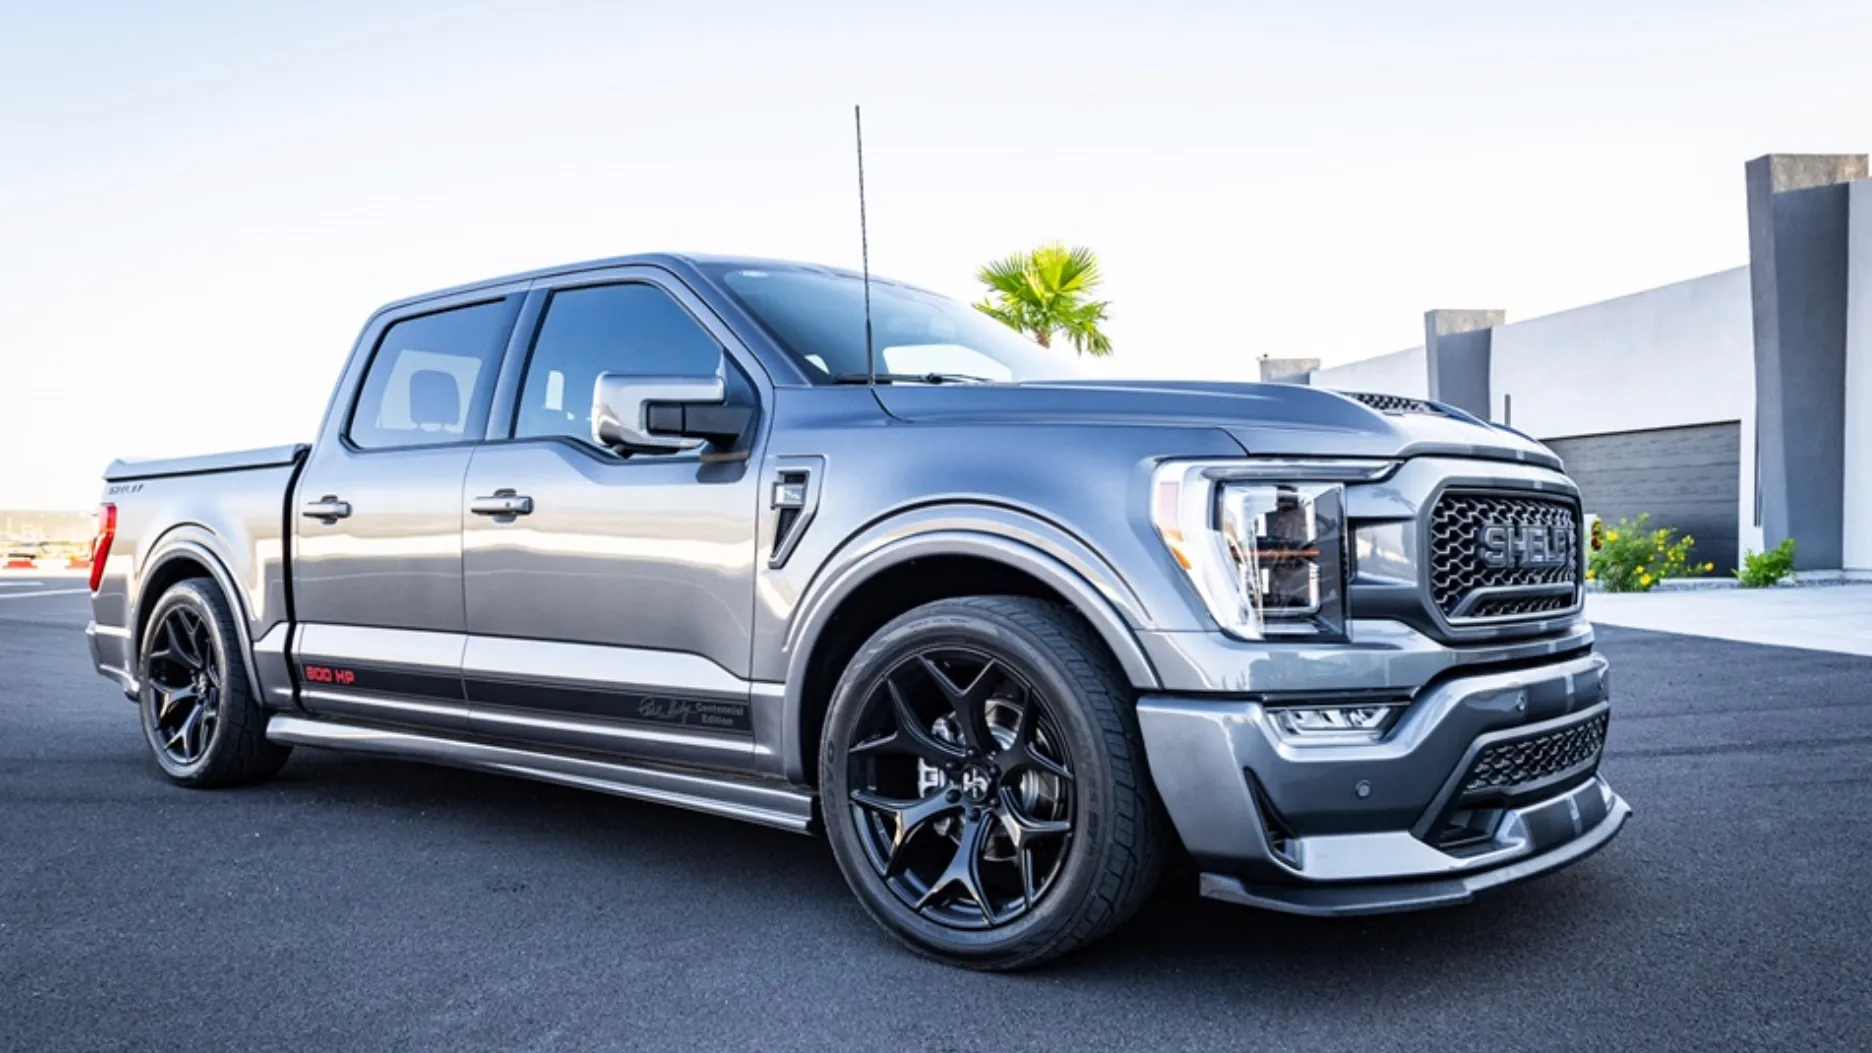 Centennial Edition Ford Shelby F150 Super Snake pushes 800 hp for